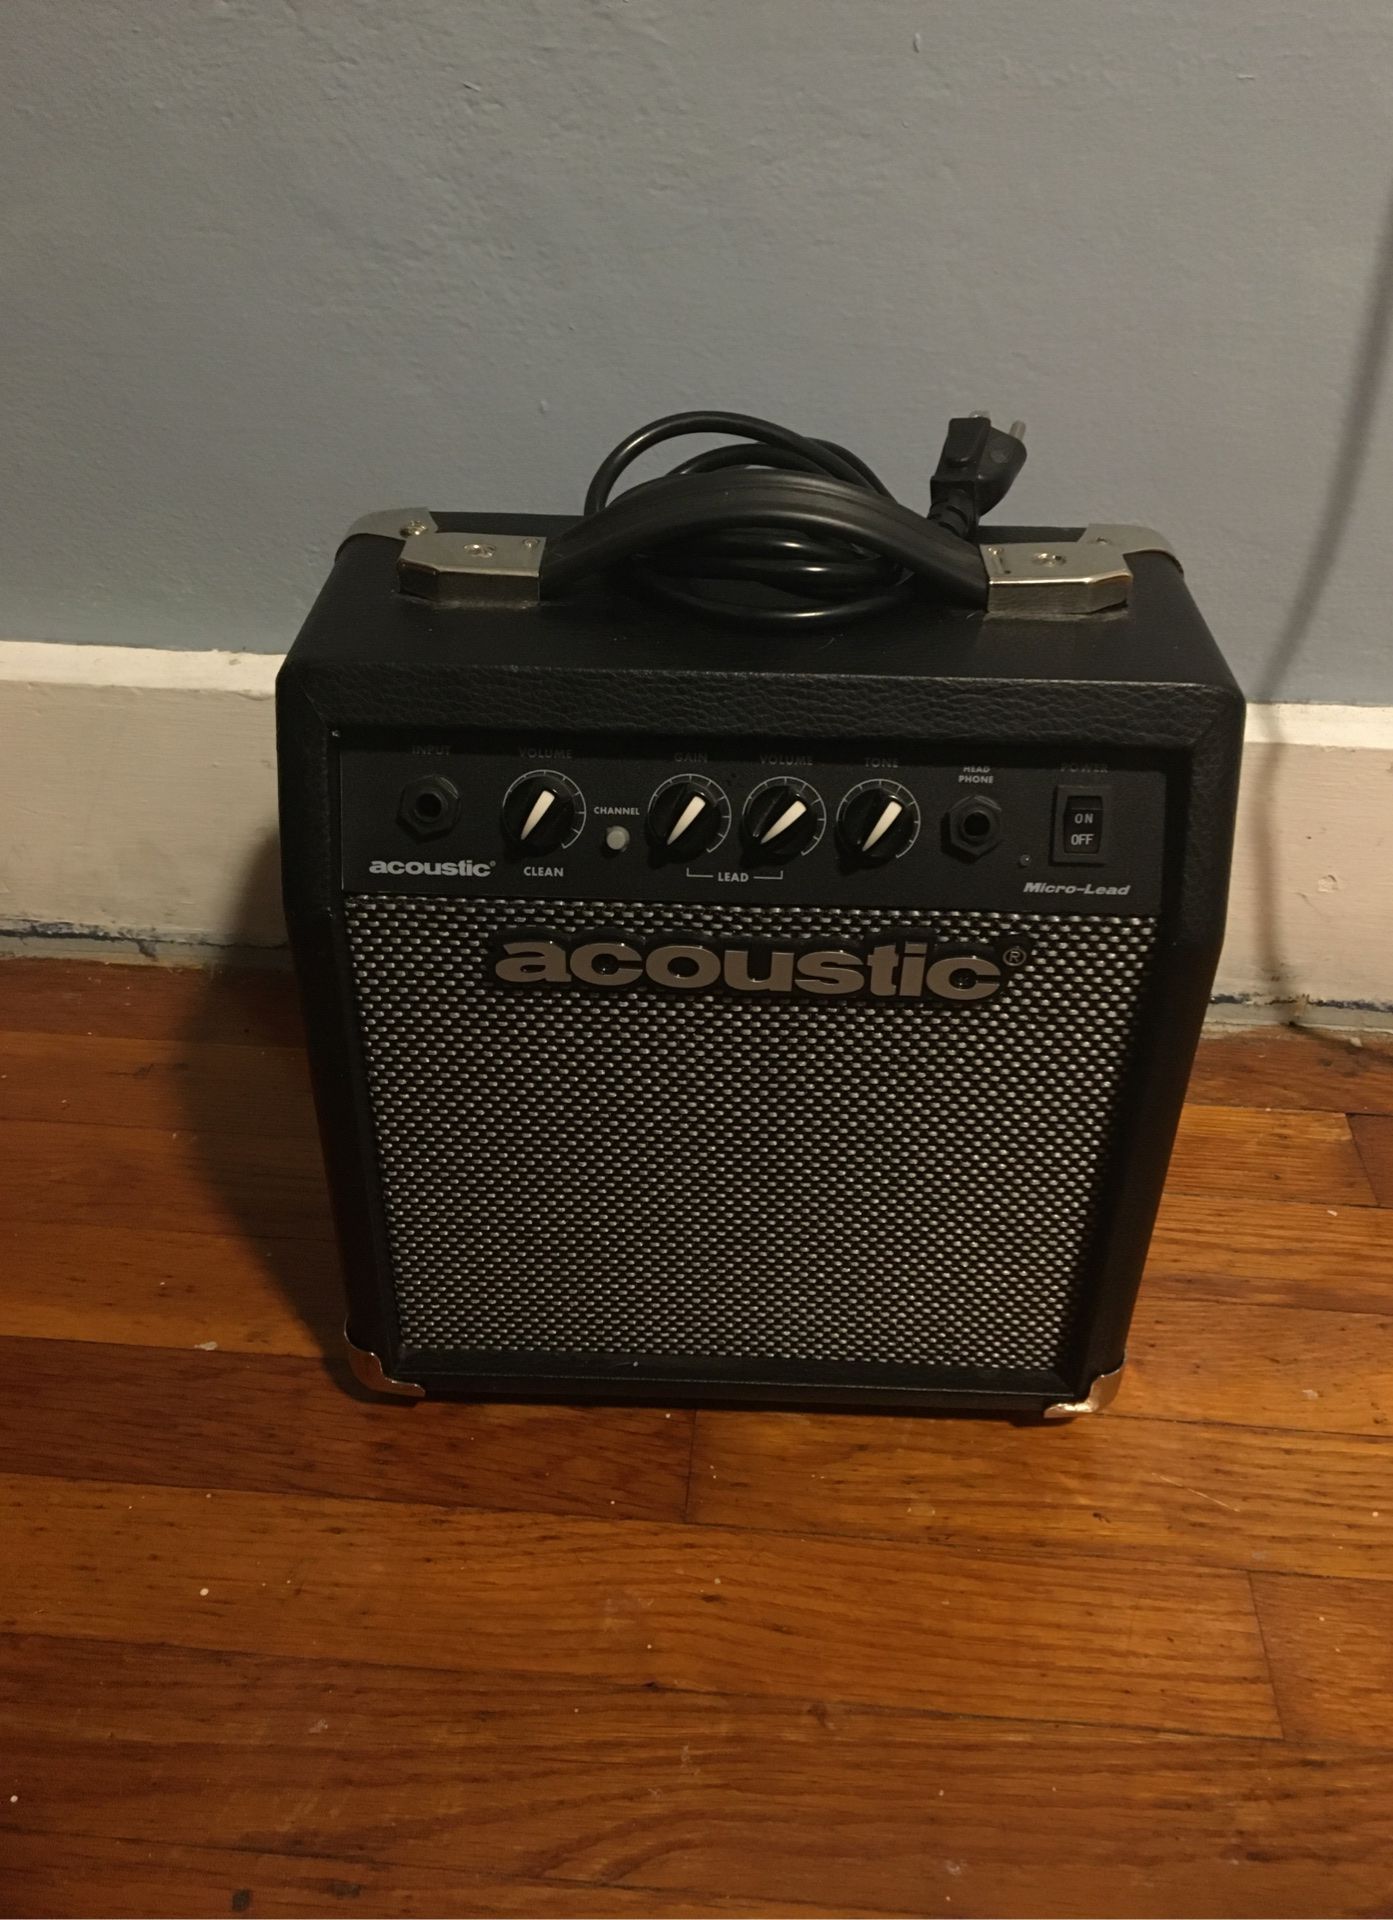 Acoustic Micro-Lead amp for Electric guitars